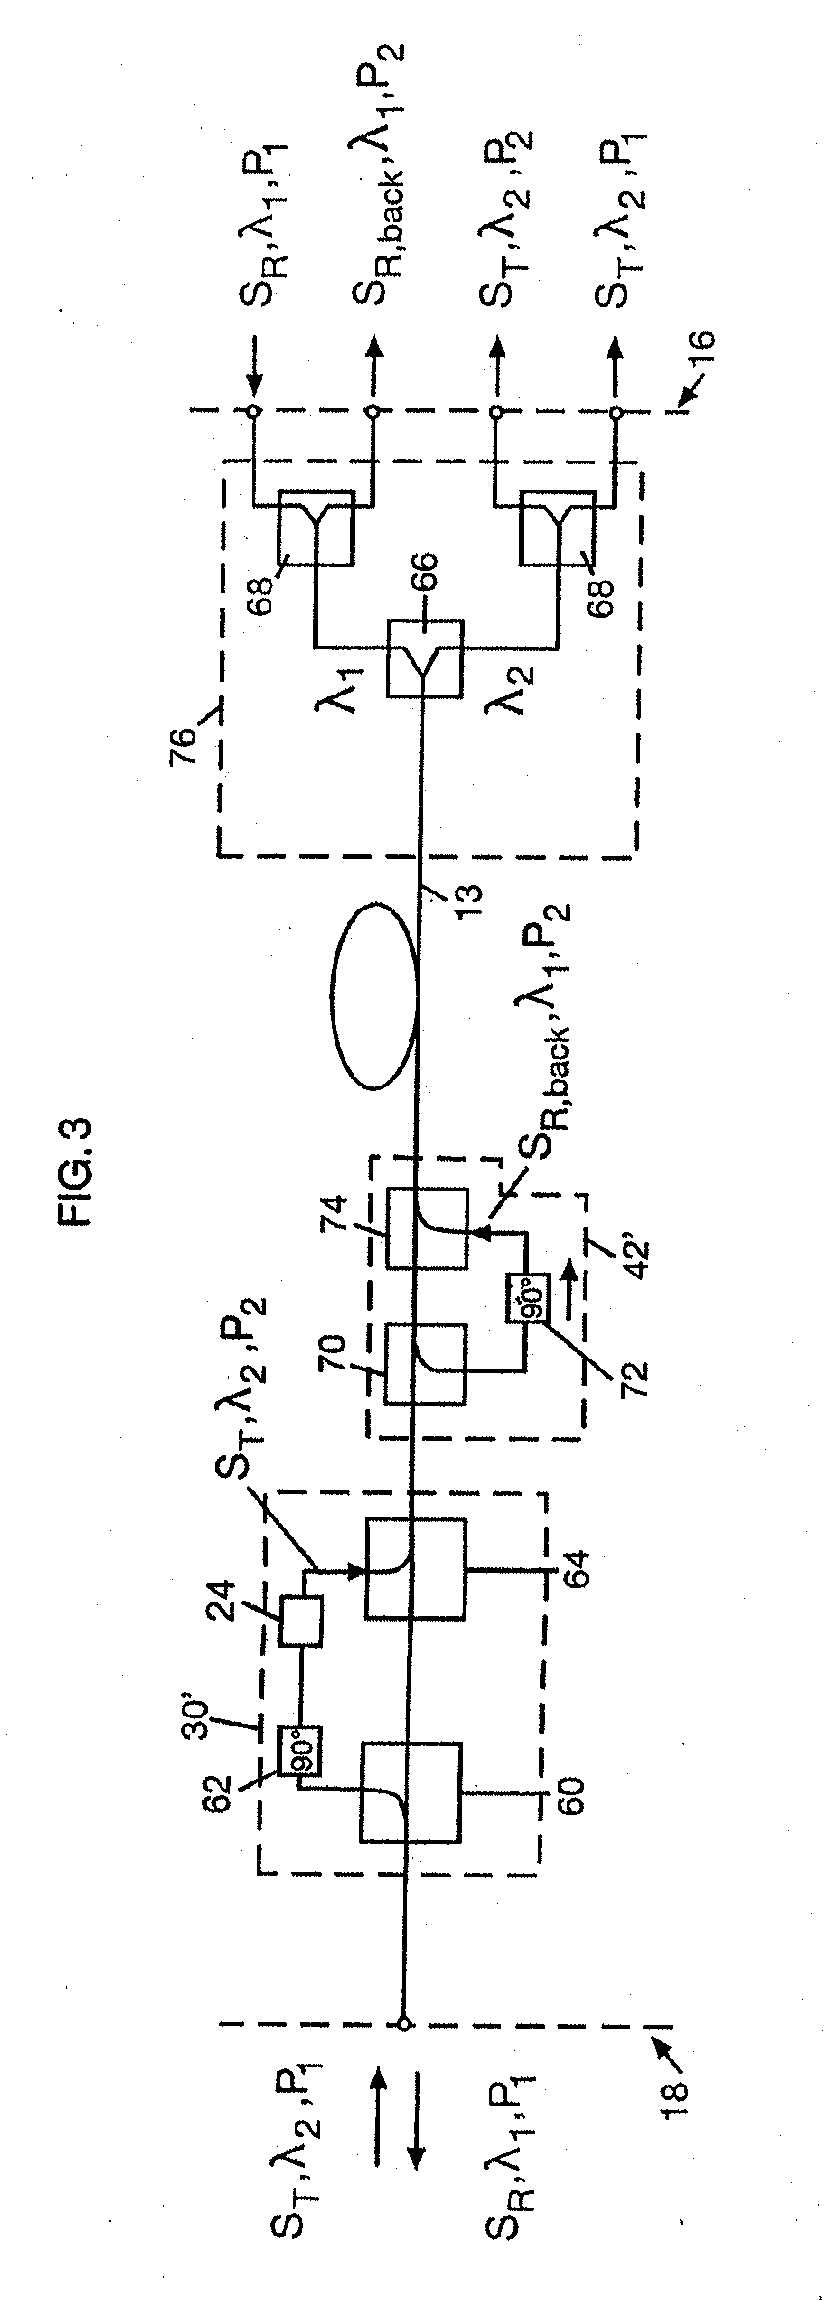 Method and system of monitoring a data transmission link, particularly an optical, bidirectional data transmission link